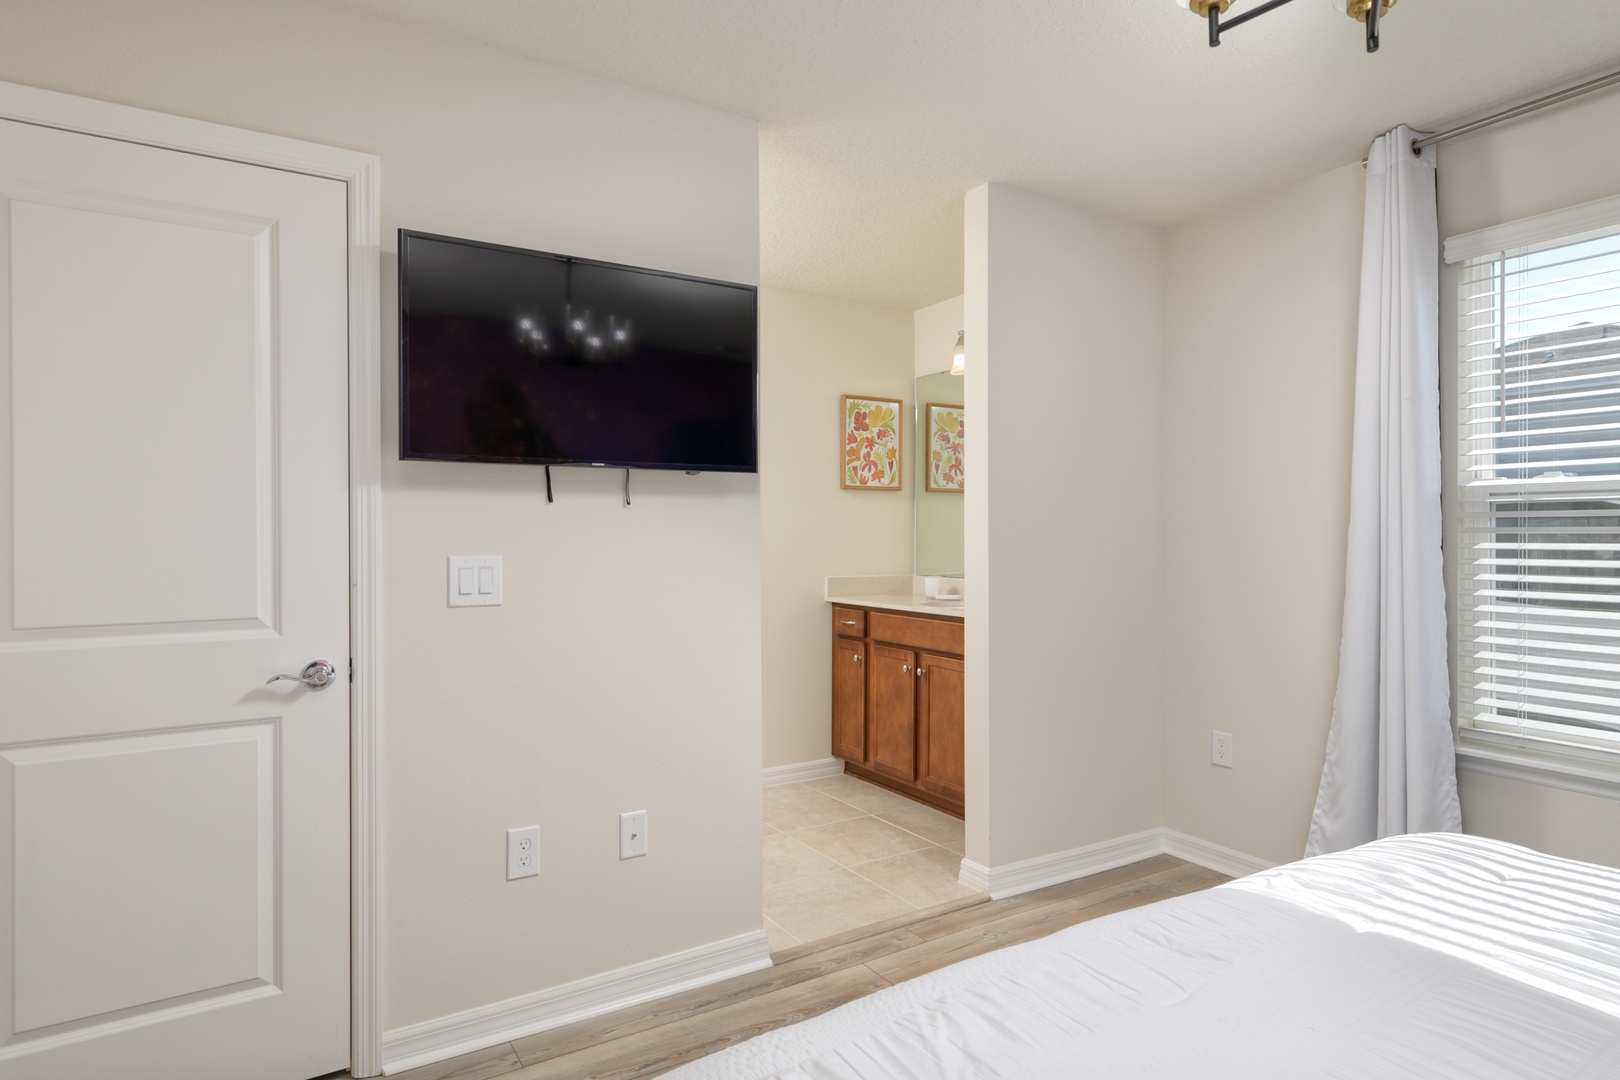 Get tangled in this 2nd floor king suite, offering a Smart TV and Jack & Jill bath